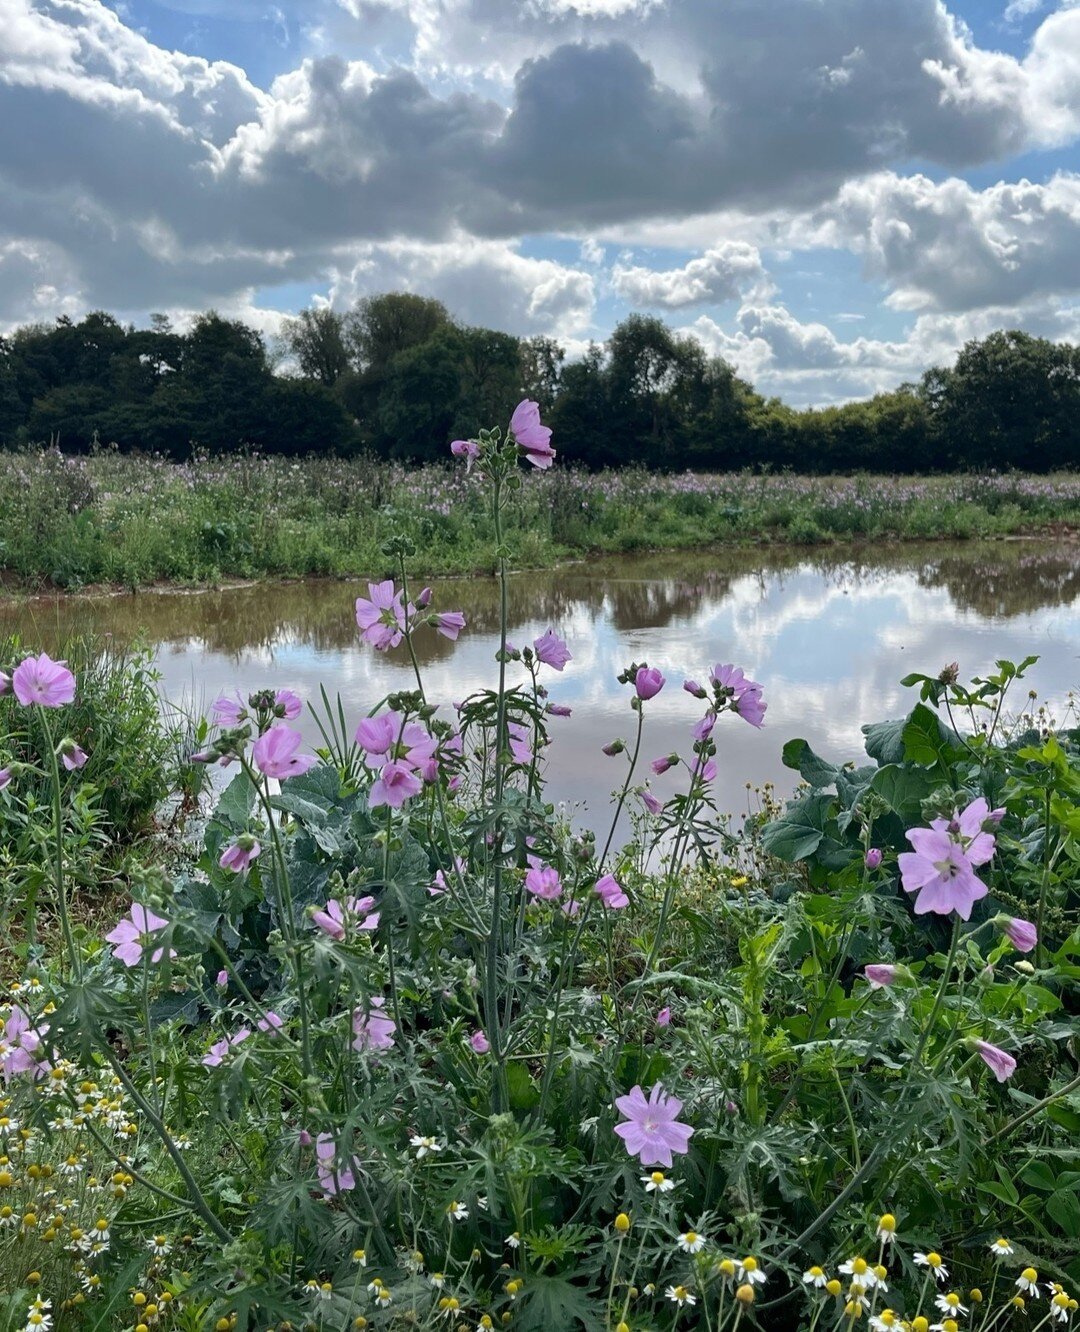 At Downton Hall Estate, we are committed to finding innovative ways to benefit the environment. Here are some of the ways we are making a positive impact:⁠
⁠
🌿We have transformed an 11-acre arable field into a wading bird habitat, providing a safe h